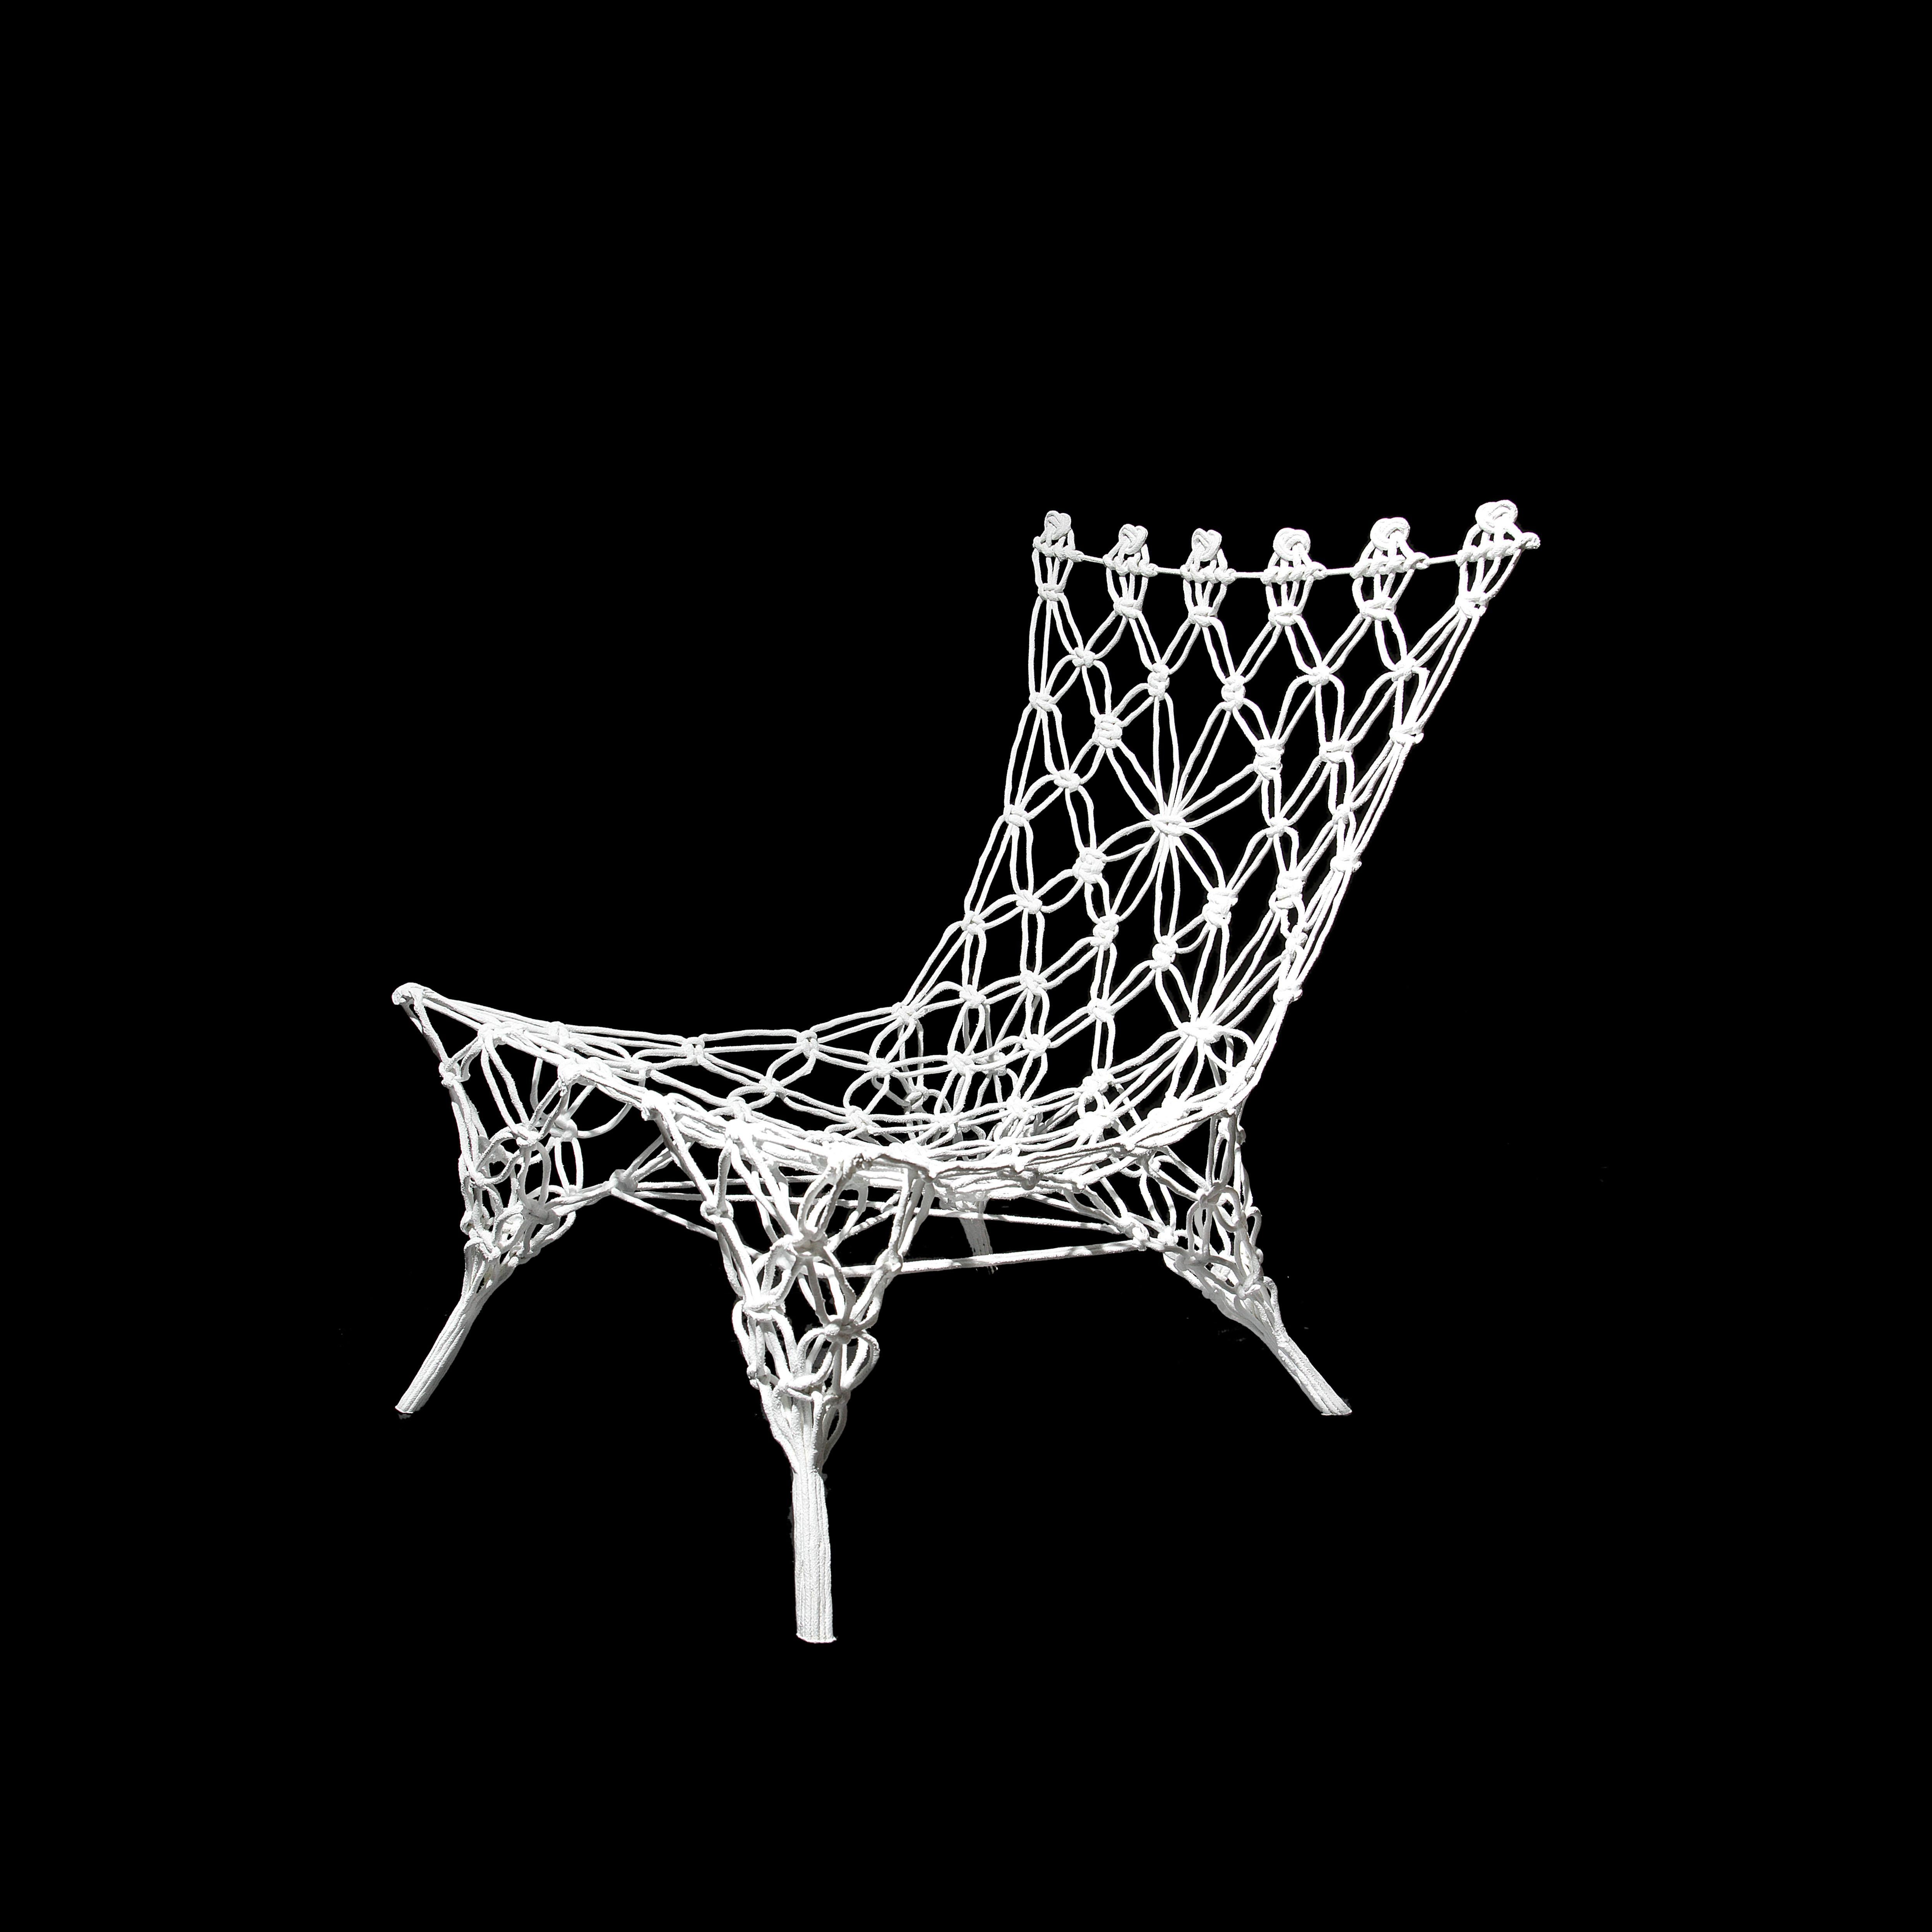 Contemporary Knotted Chair, White, by Marcel Wanders, Hand-Knotted Chair, 2007, Unique For Sale